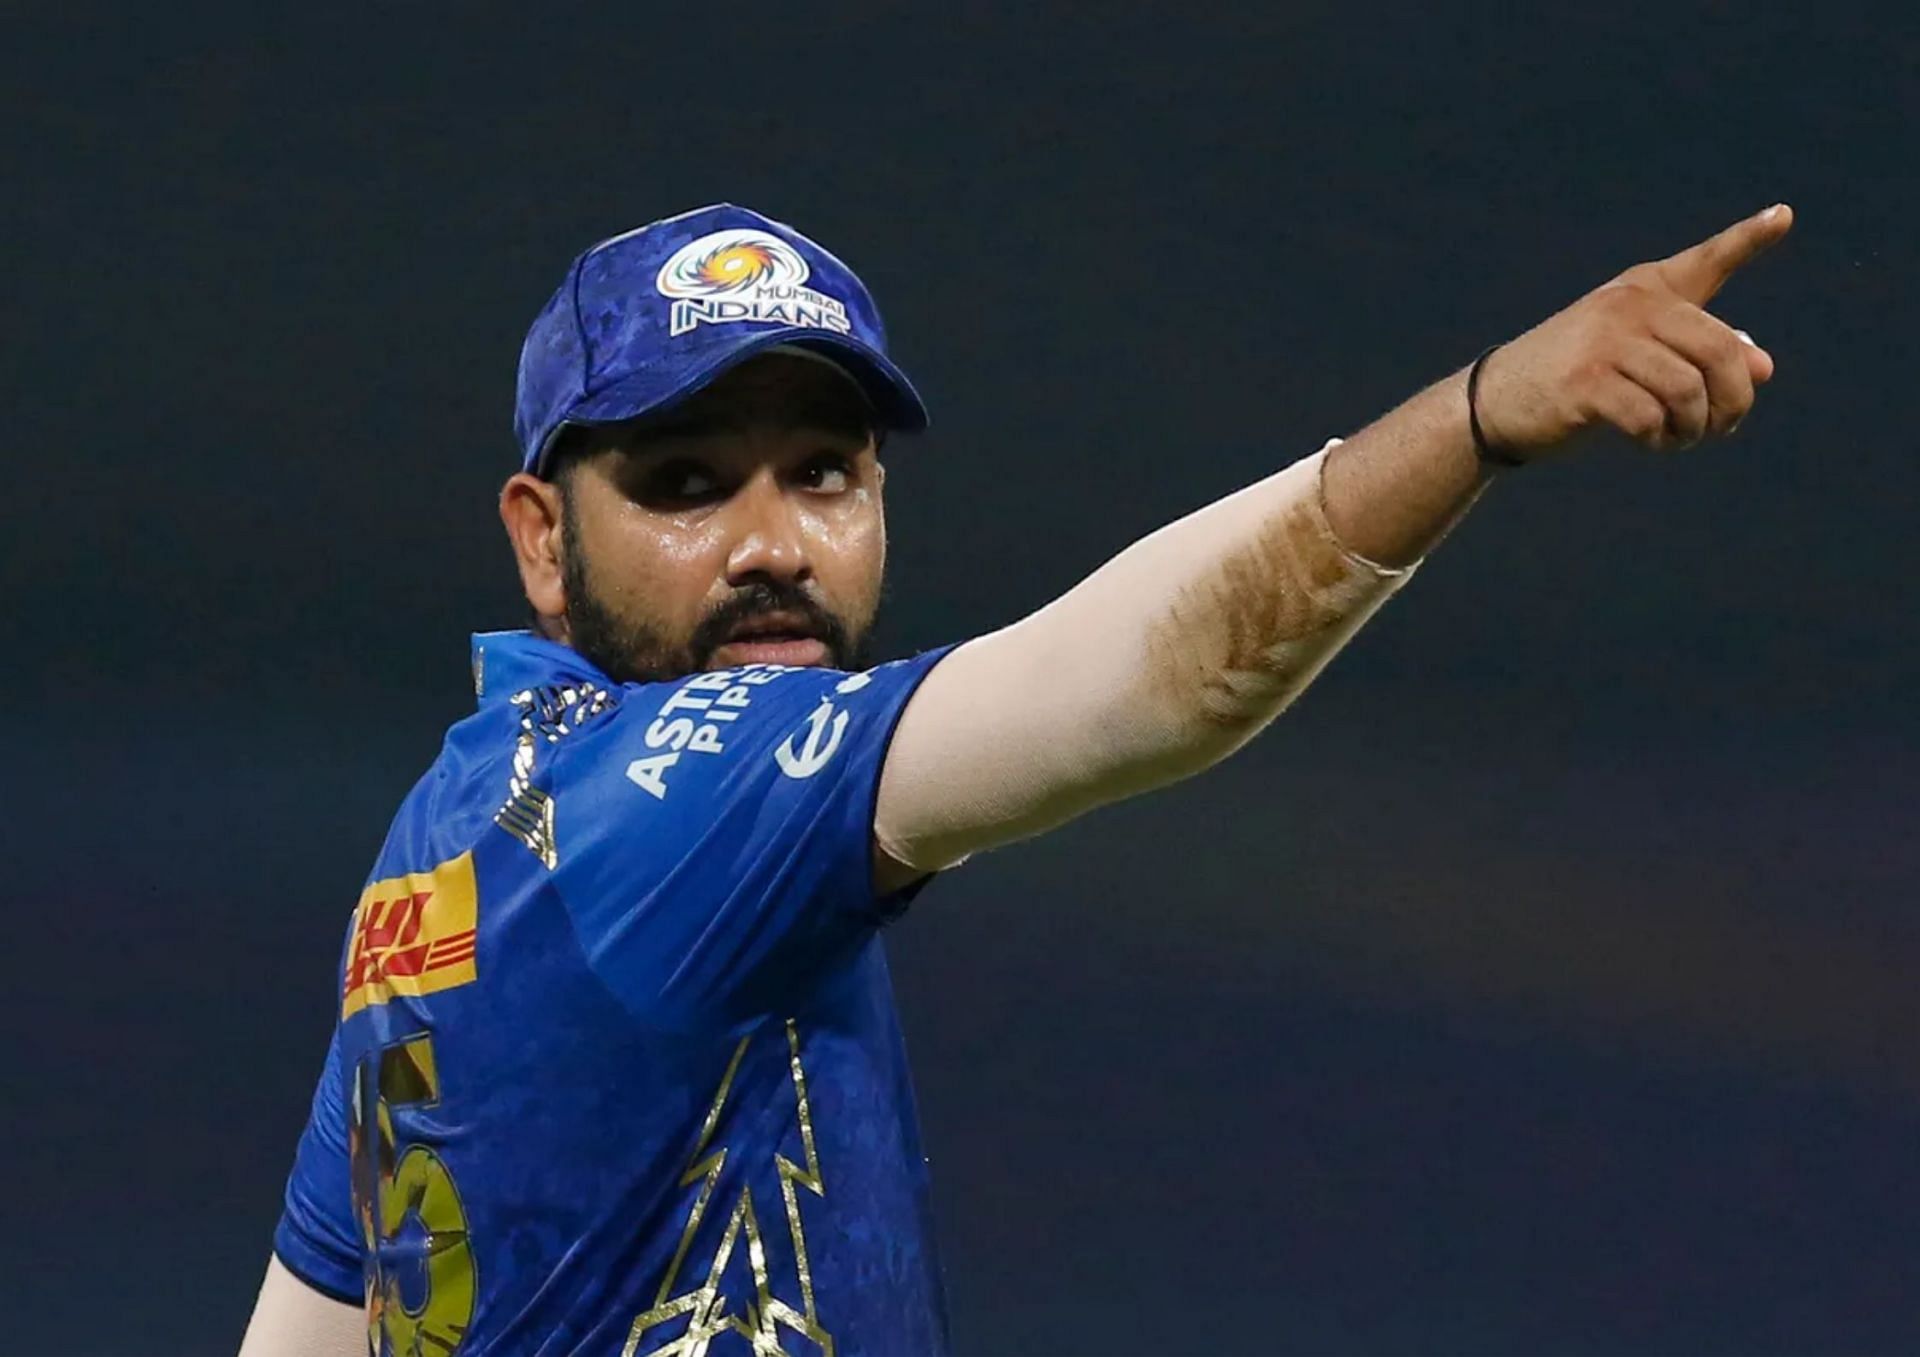 Mumbai Indians skipper Rohit Sharma took to Twitter to share a message for their fans amidst a forgettable IPL 2022 campaign (Picture Credits: IPL).